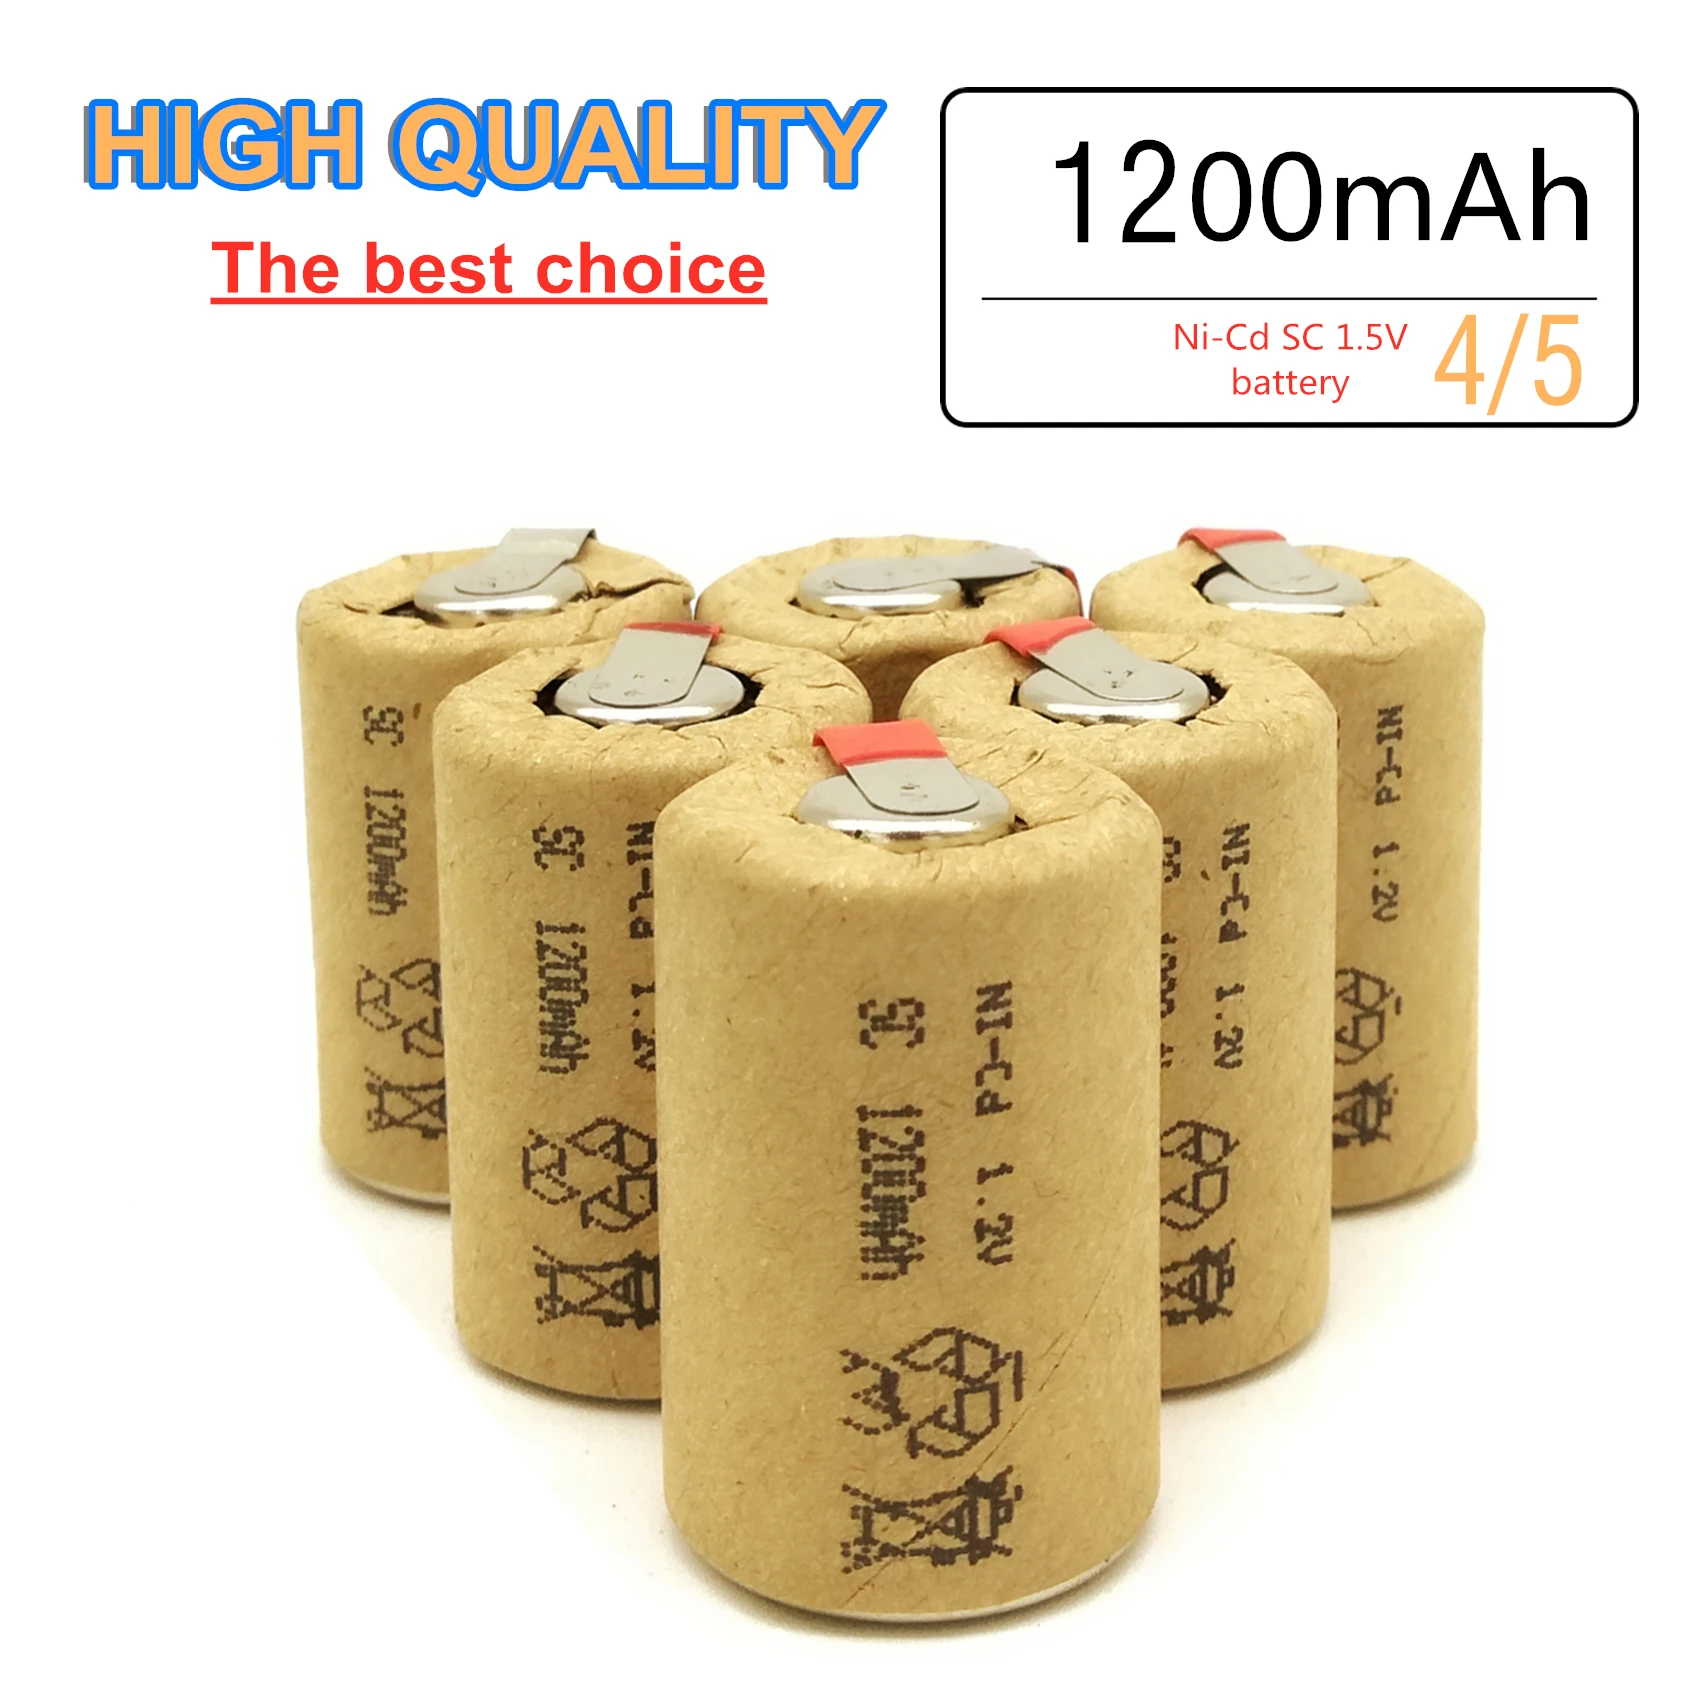 

32PCS High Quality 4/5 SC Sub C NI-Cd 1.2V 1200mAh Rechargeable Battery With Tabs, For Screwdriver Electric Tools